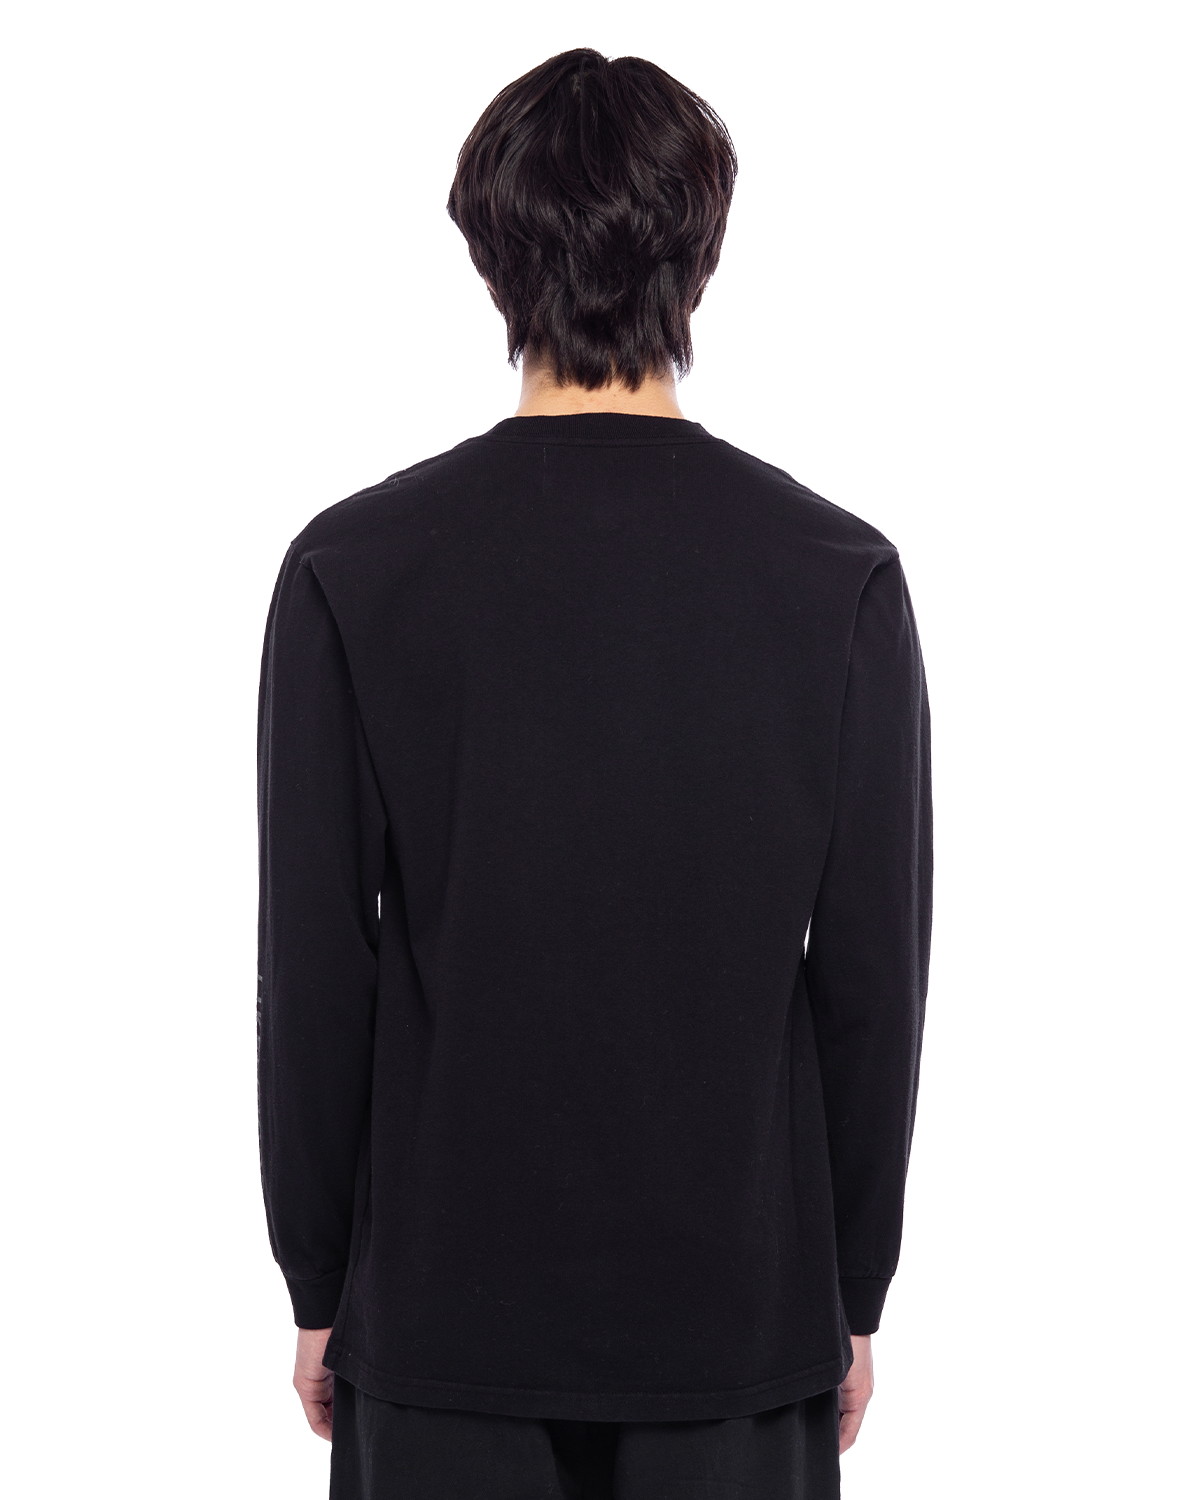 Embroidered Kevin Long Sleeve Black